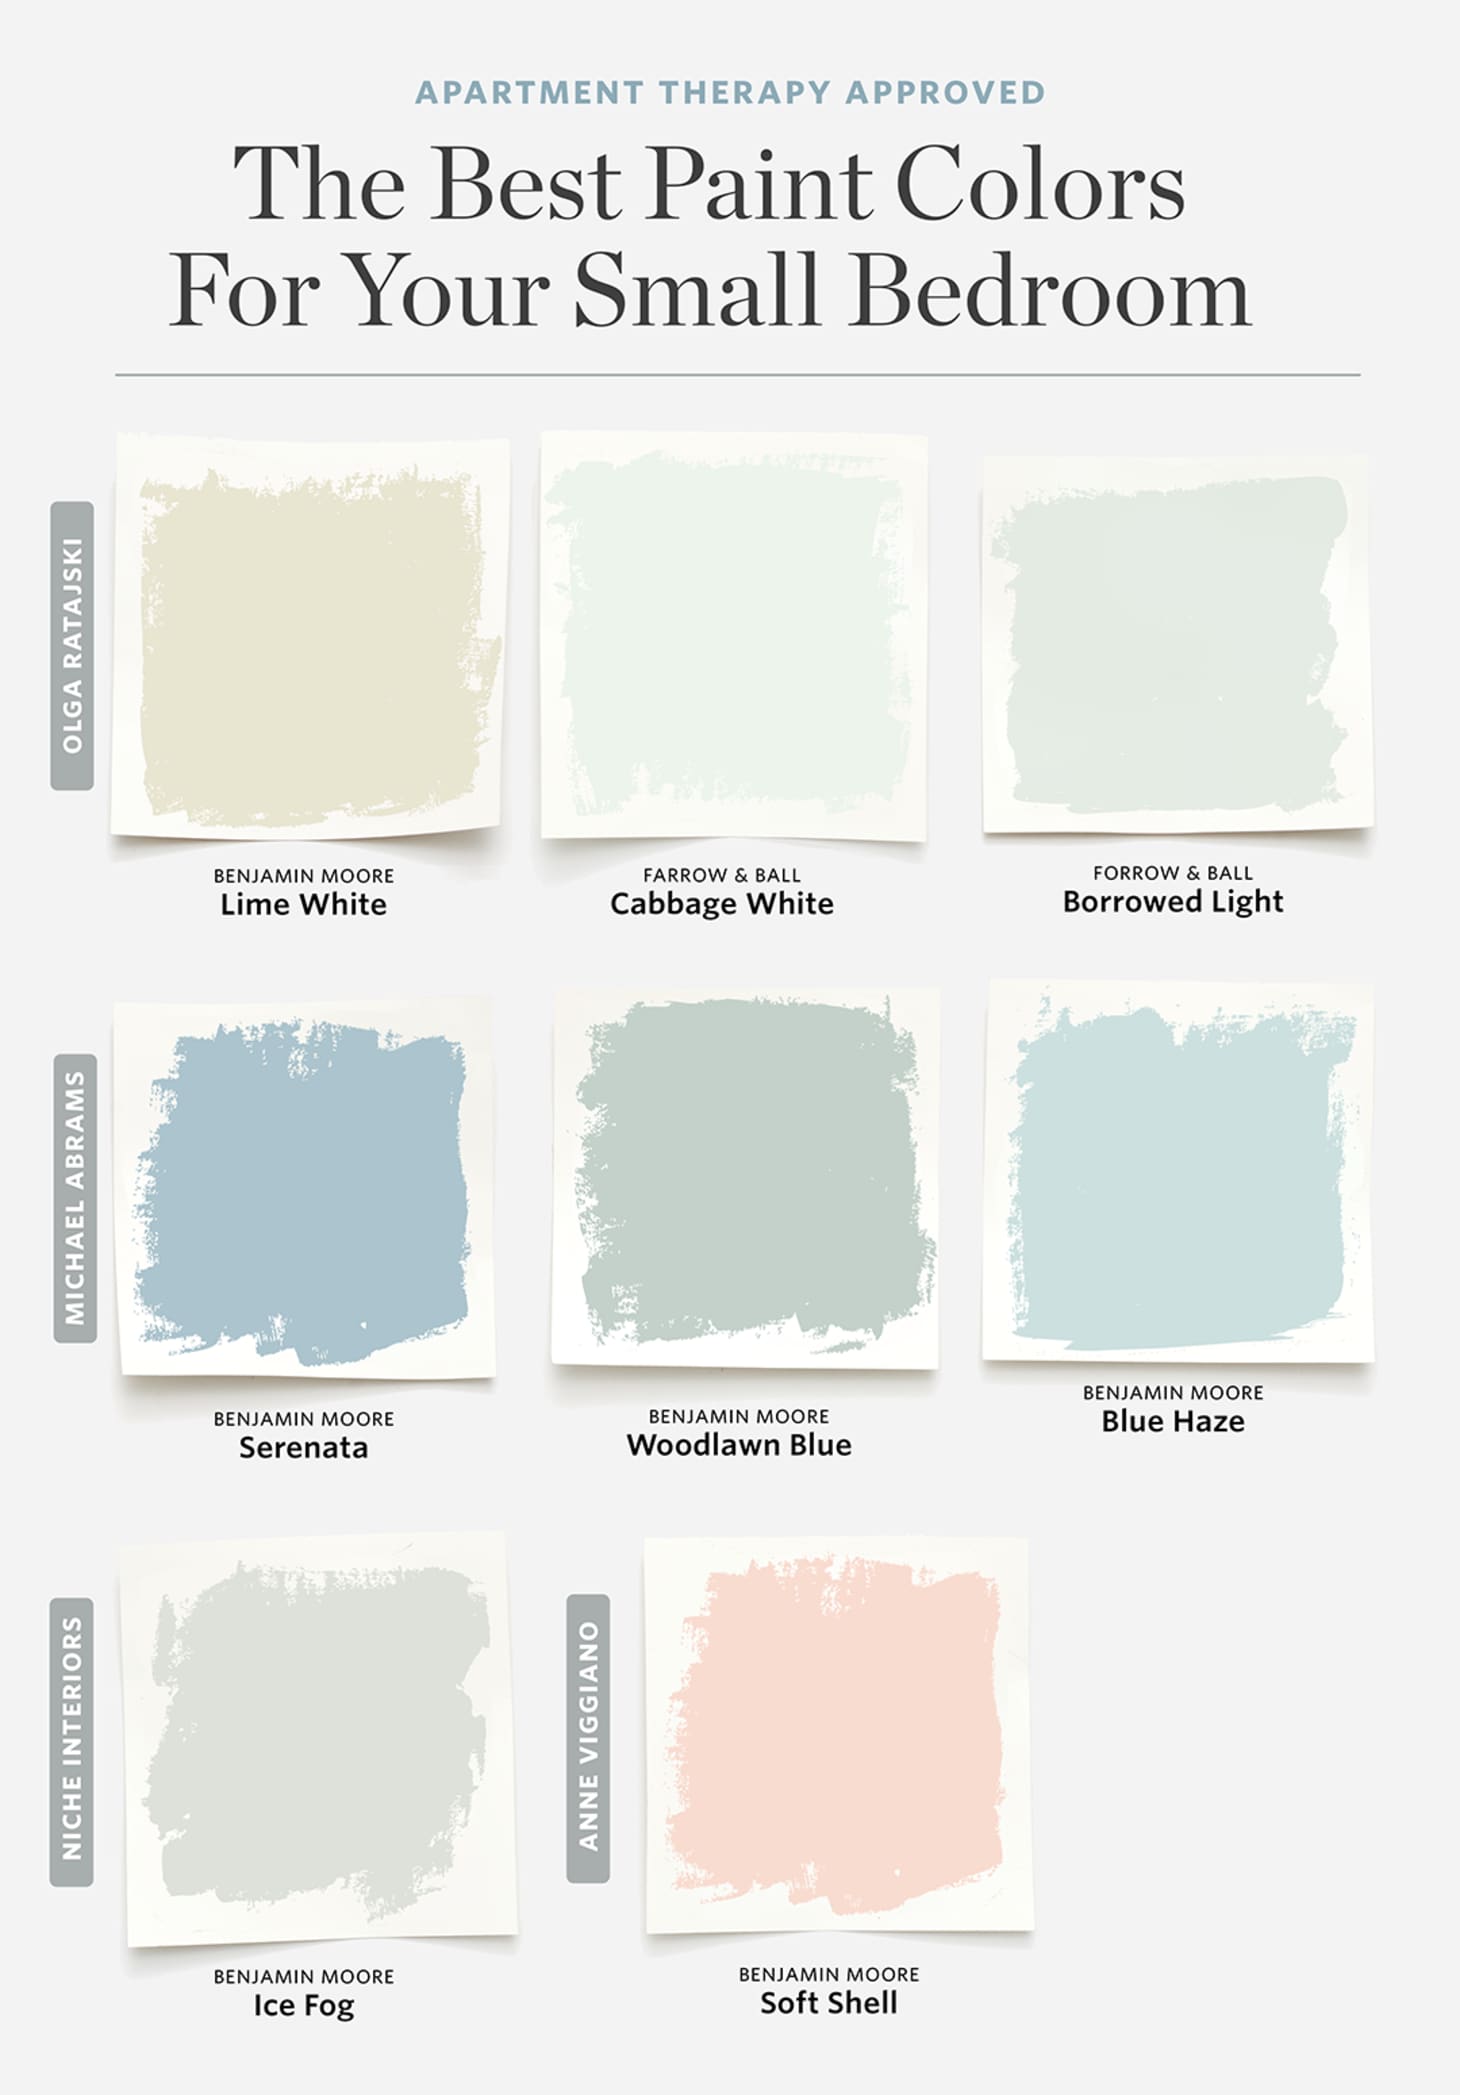 Paint Colors For Small Bedrooms Apartment Therapy